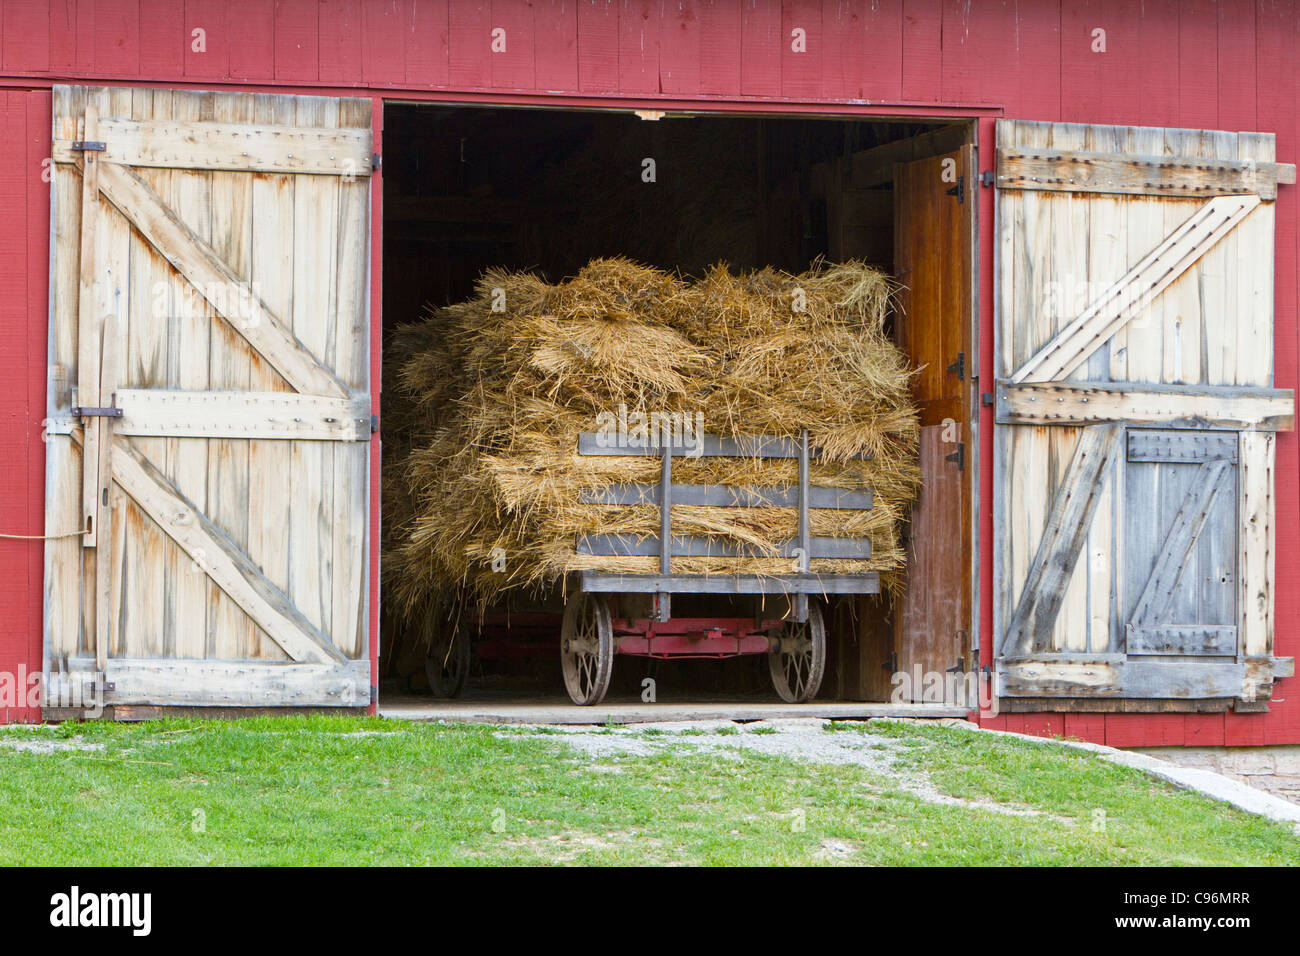 Wagon with bales of hay. Stock Photo